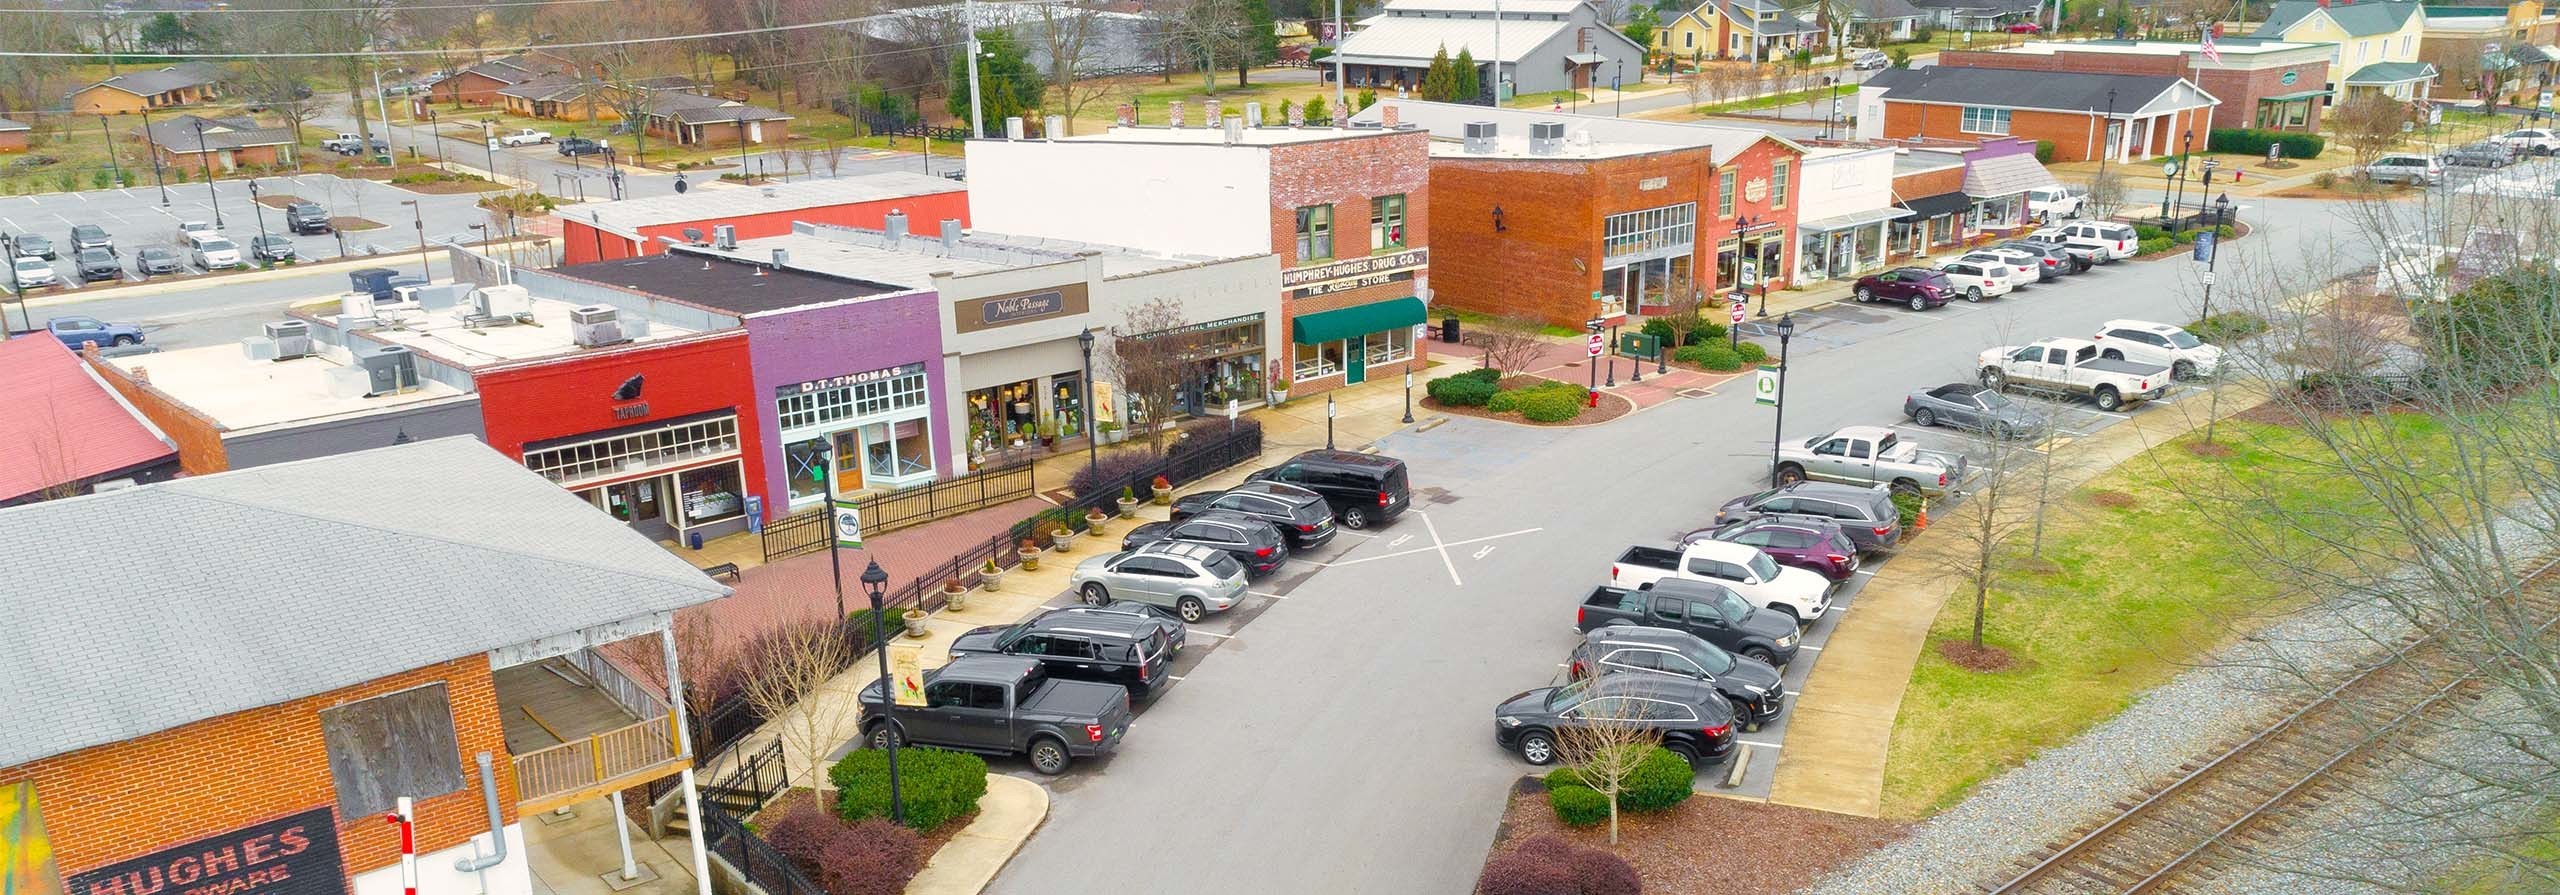 Street view of real estate in Madison, Alabama